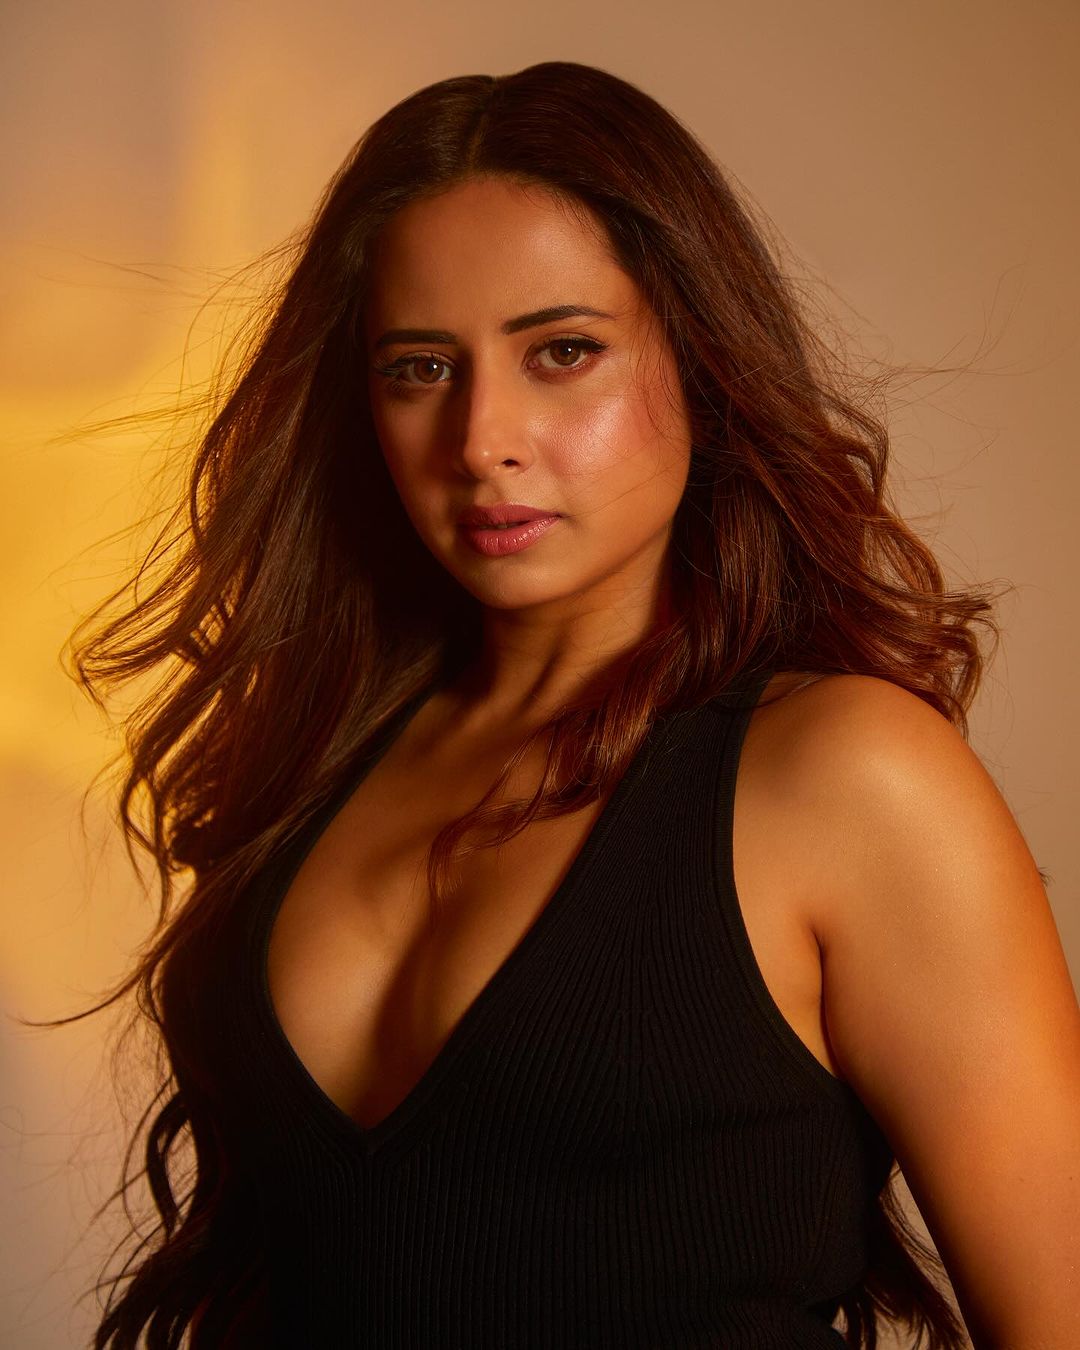 Fresh Beats! Sargun Mehta Discussed About New Show Badall Pe Paon Hai And Stereotypes. Read On!